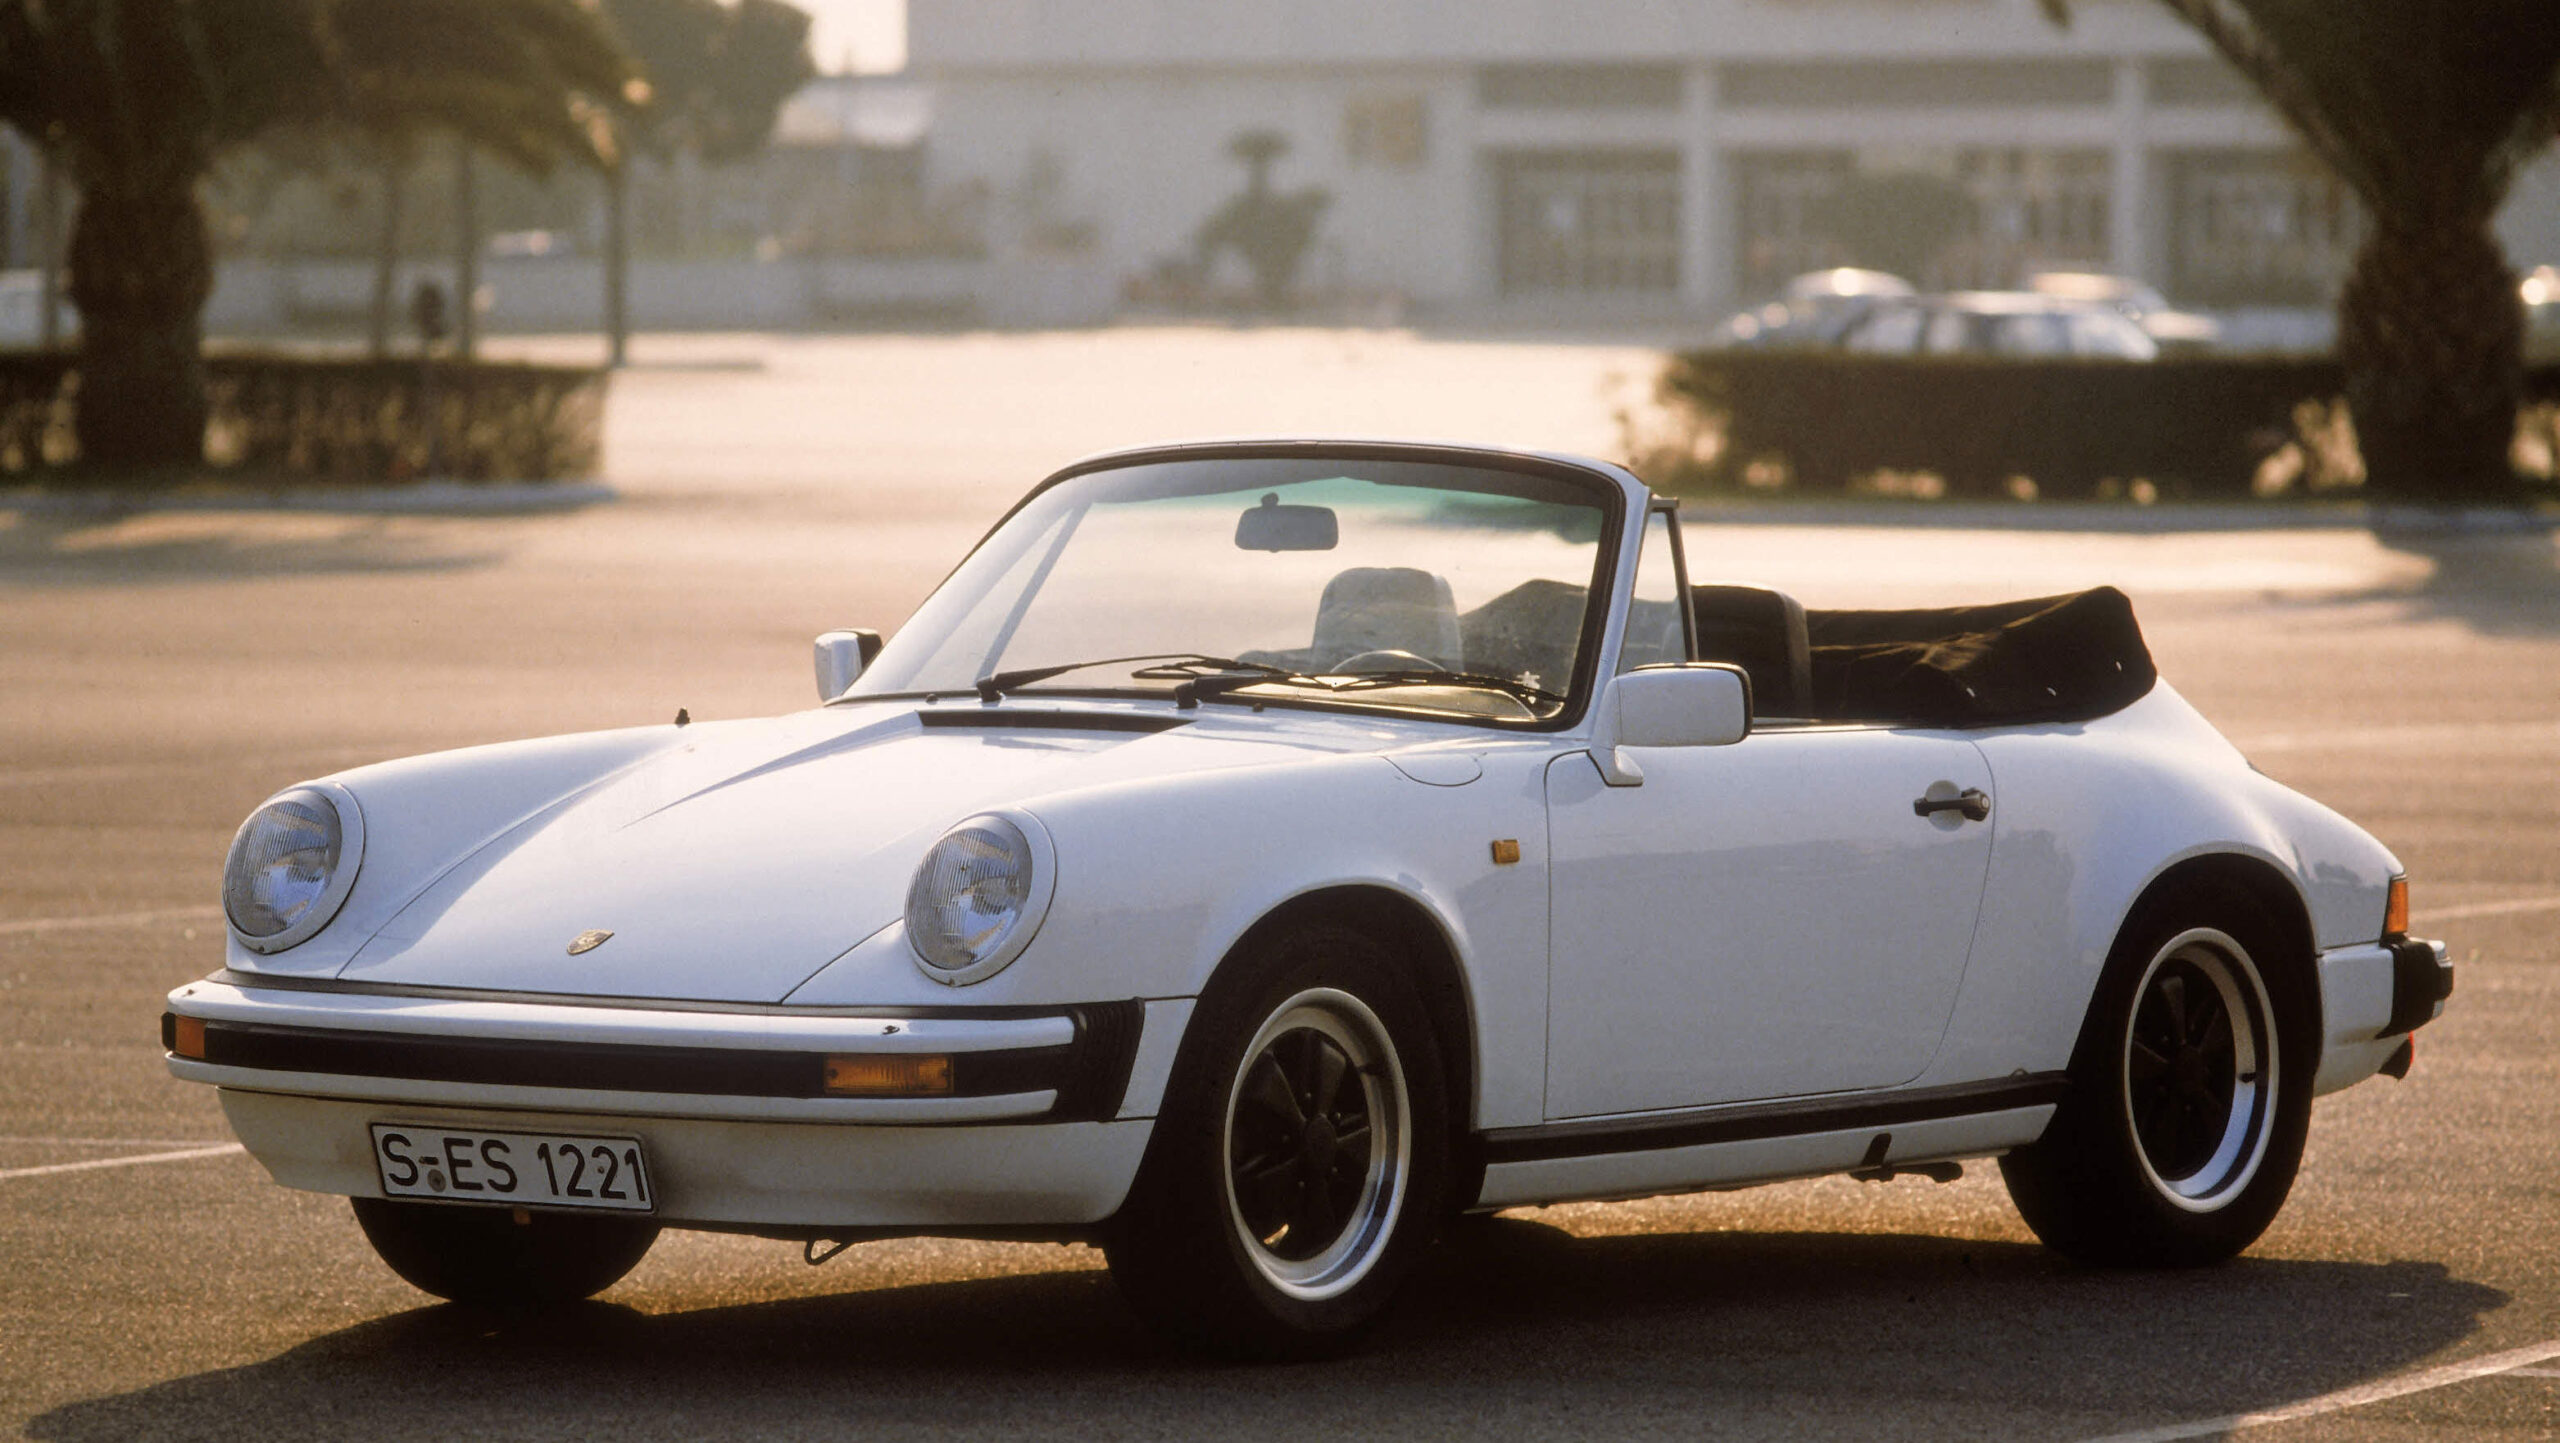 The G Model The 911 Gets Off to a Flying Start